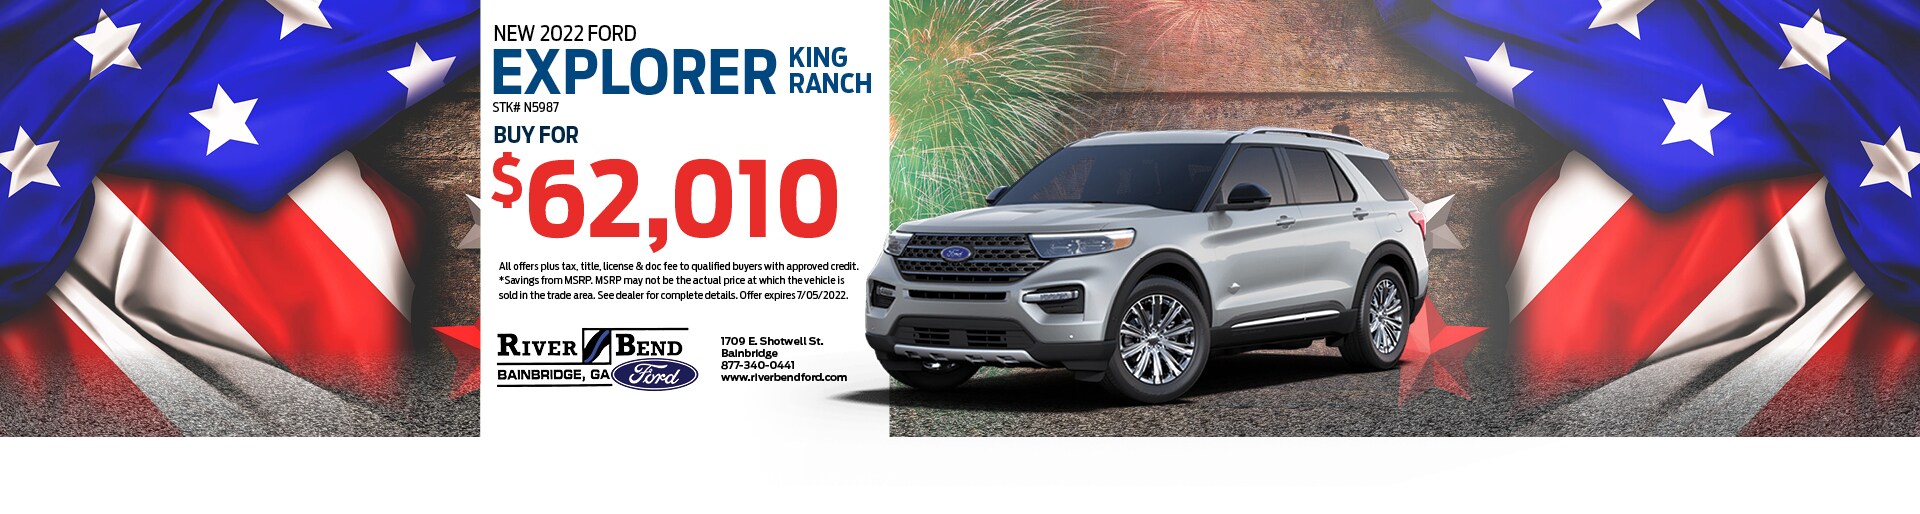 New 2022 Ford Explorer King Ranch for $62,010